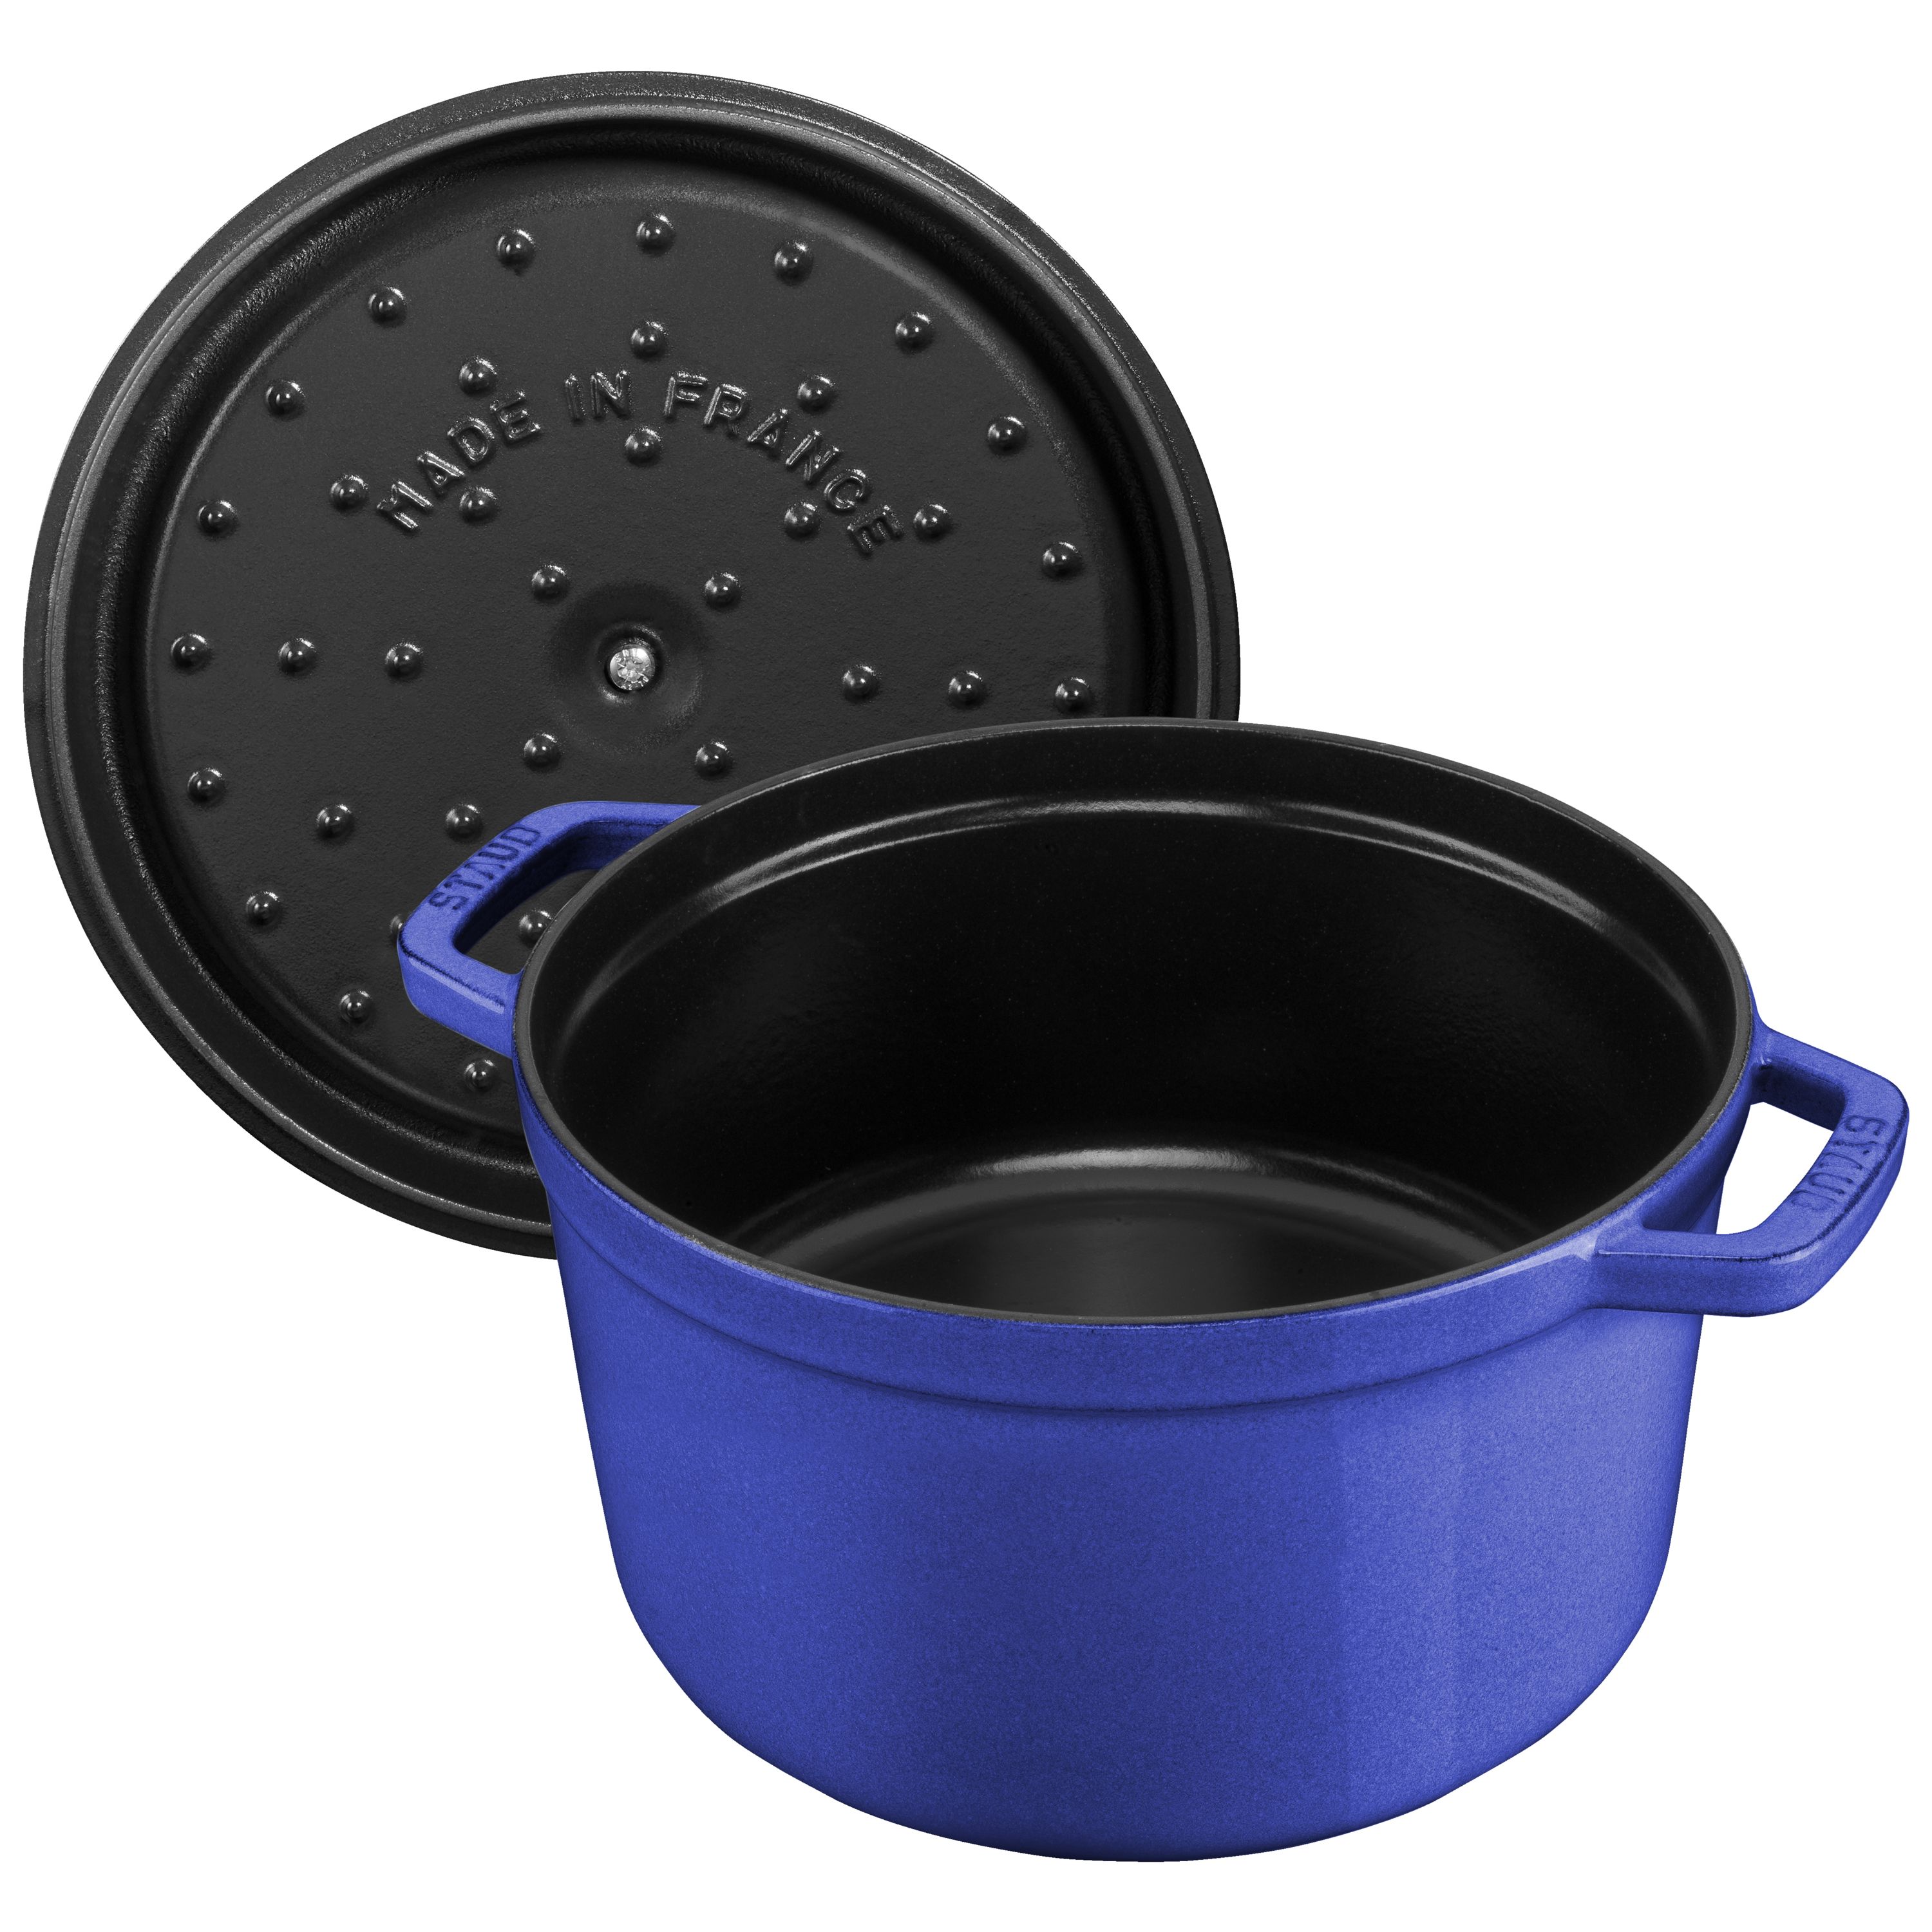 Staub Dutch Oven: Get our favorite cocotte at a substantial discount